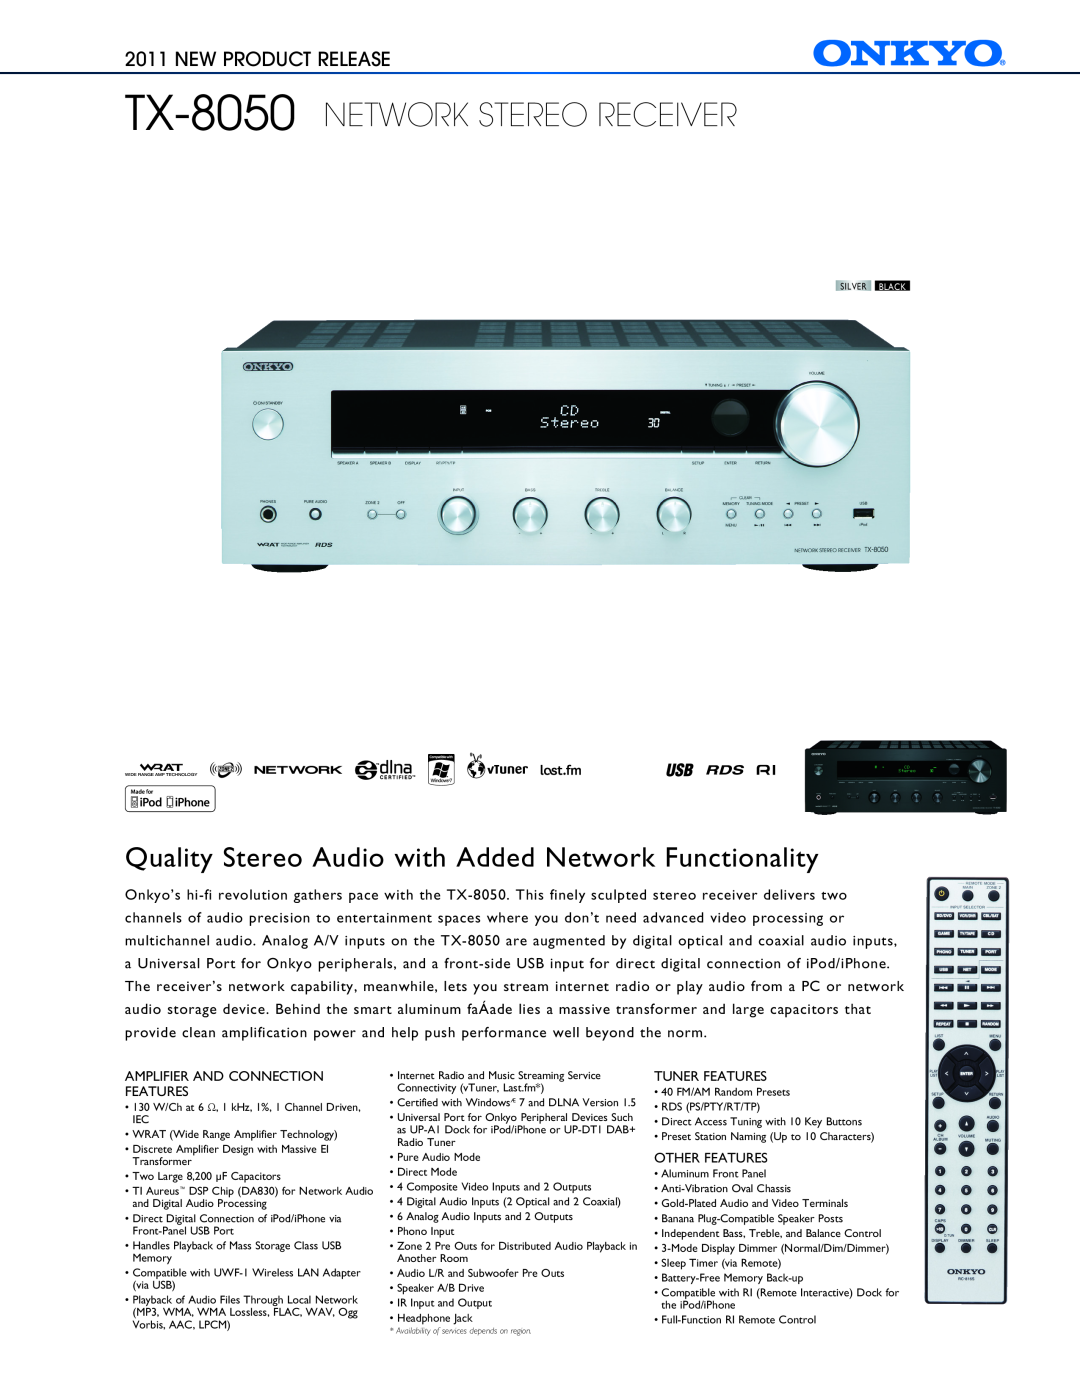 Onkyo manual TX-8050 NETWORK STEREO RECEIVER, New Product Release 